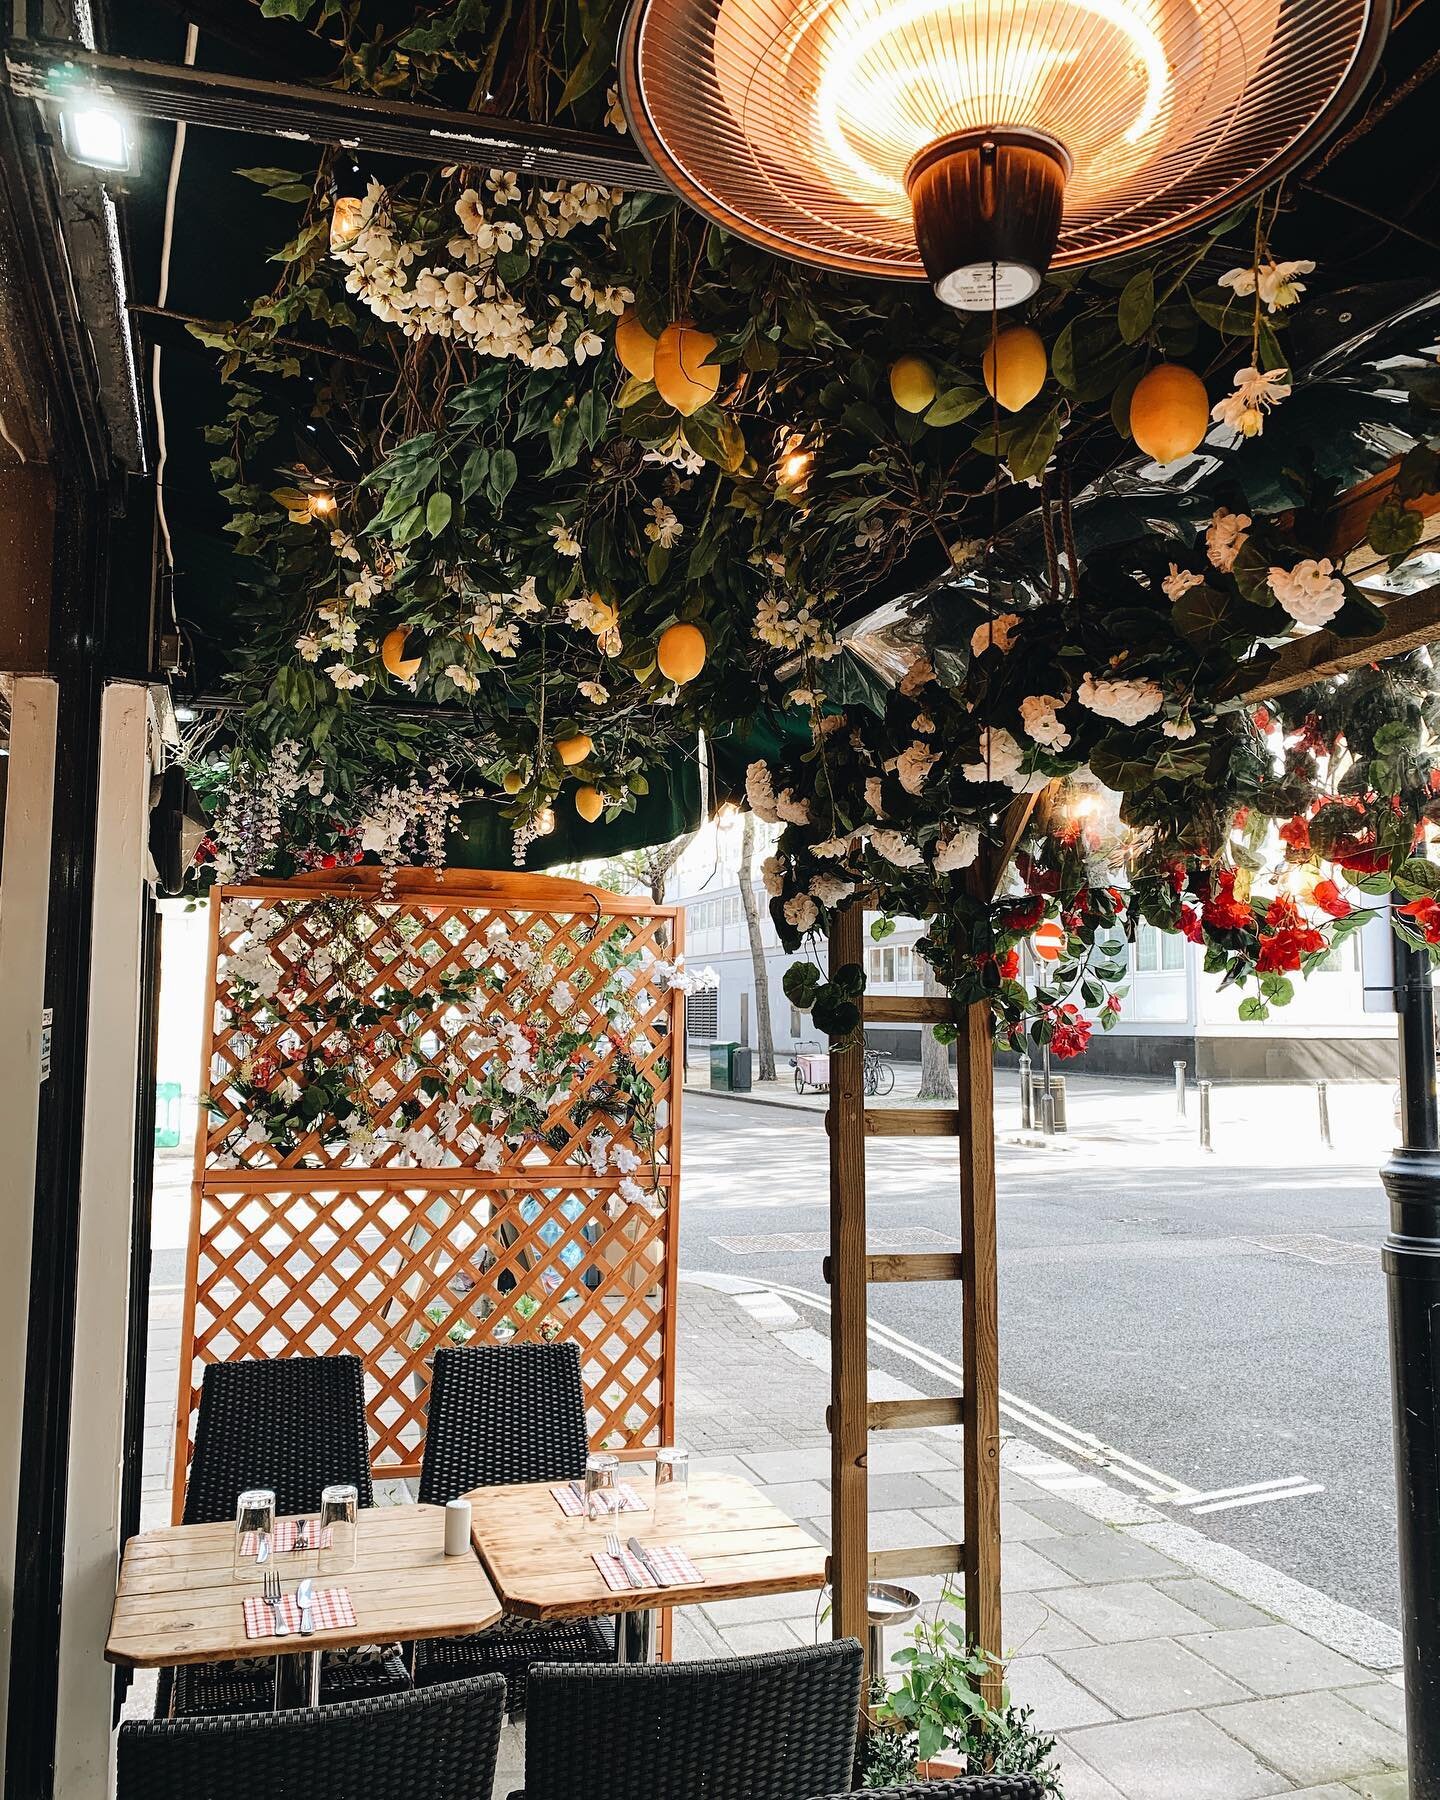 Welcome back ❤️ - come on by and have a seat under our lemon terrace to enjoy some lovely home cooked food and drinks 🍺 
.
.
.
.
.
#eeeeeats #timeoutlondon #fooding #londonlife #londonfood #londonfoodie #londoneats #goingoutlondon #golondonfood #pre